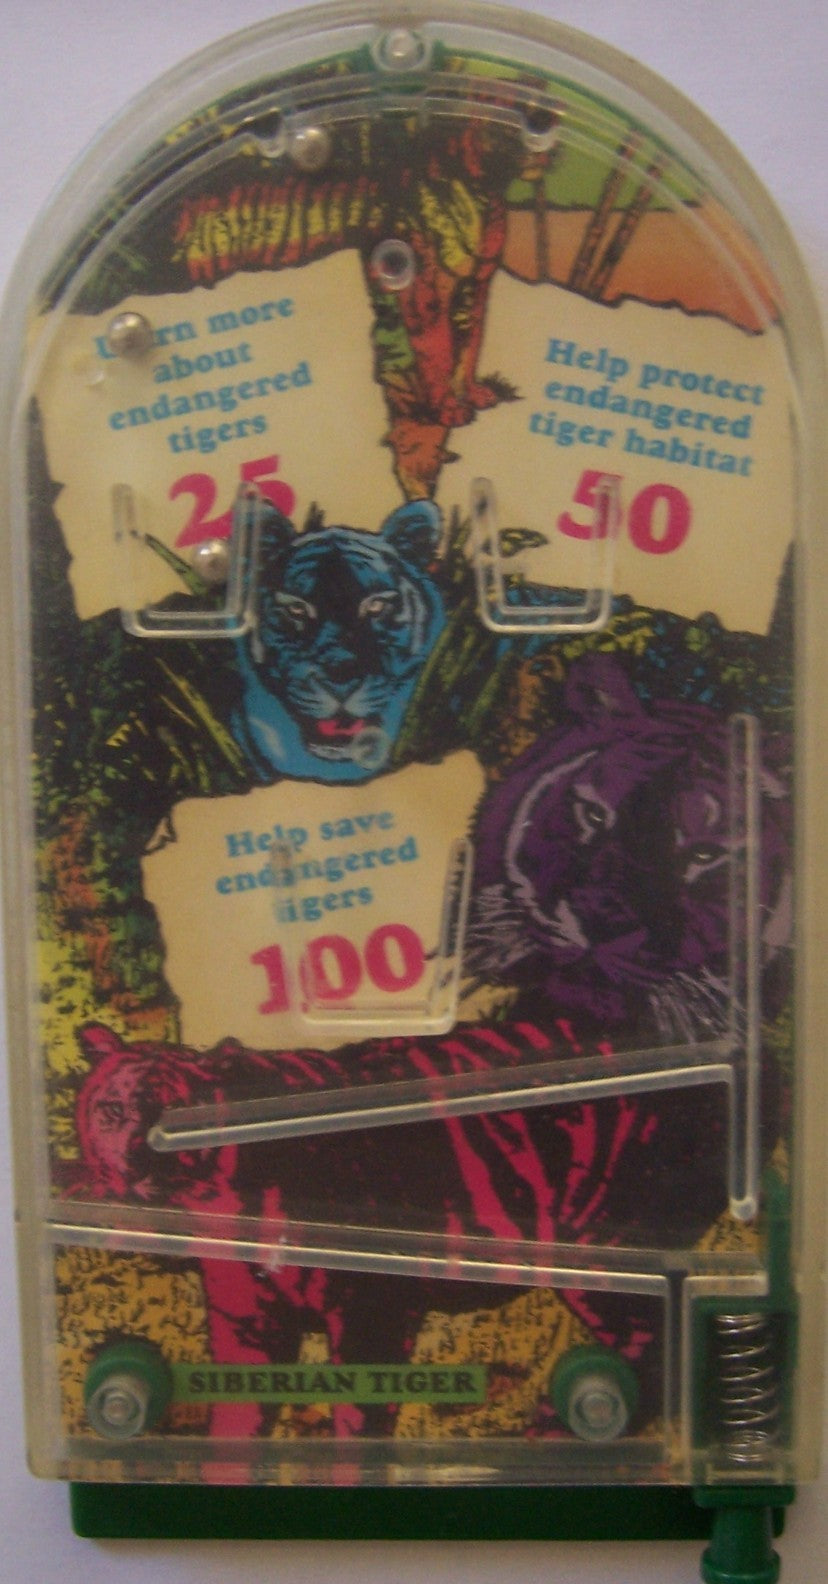 1993 Wendy's Endangered Tigers mini pinball toy or game